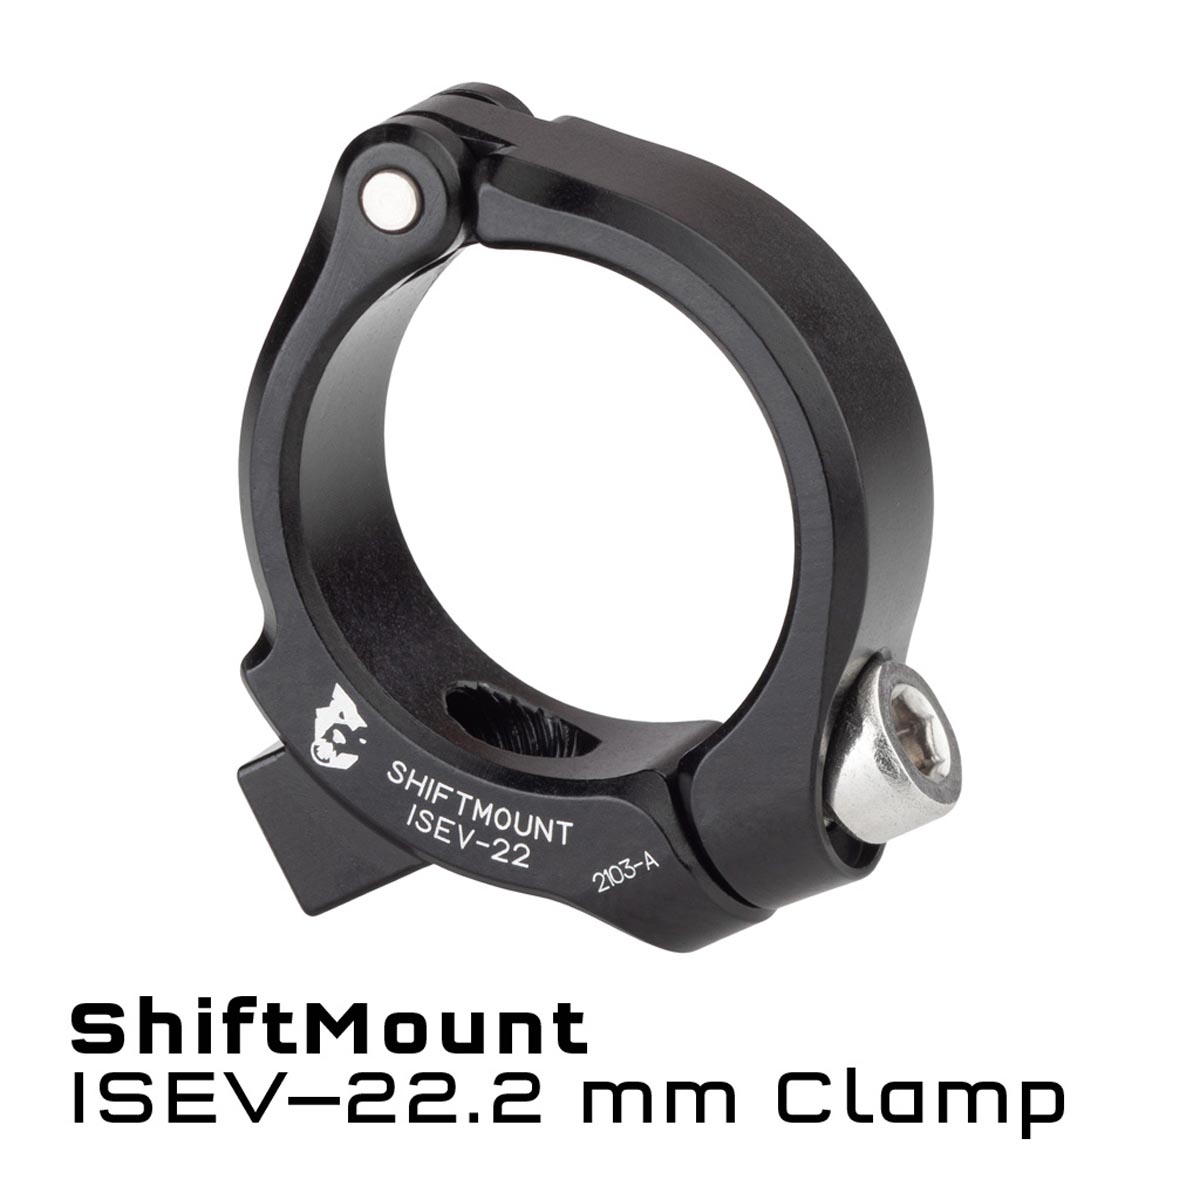 Wolf-Tooth-Components-Shift-mount-Shiftmount-adapter-SHF-22-ISEV.jpg